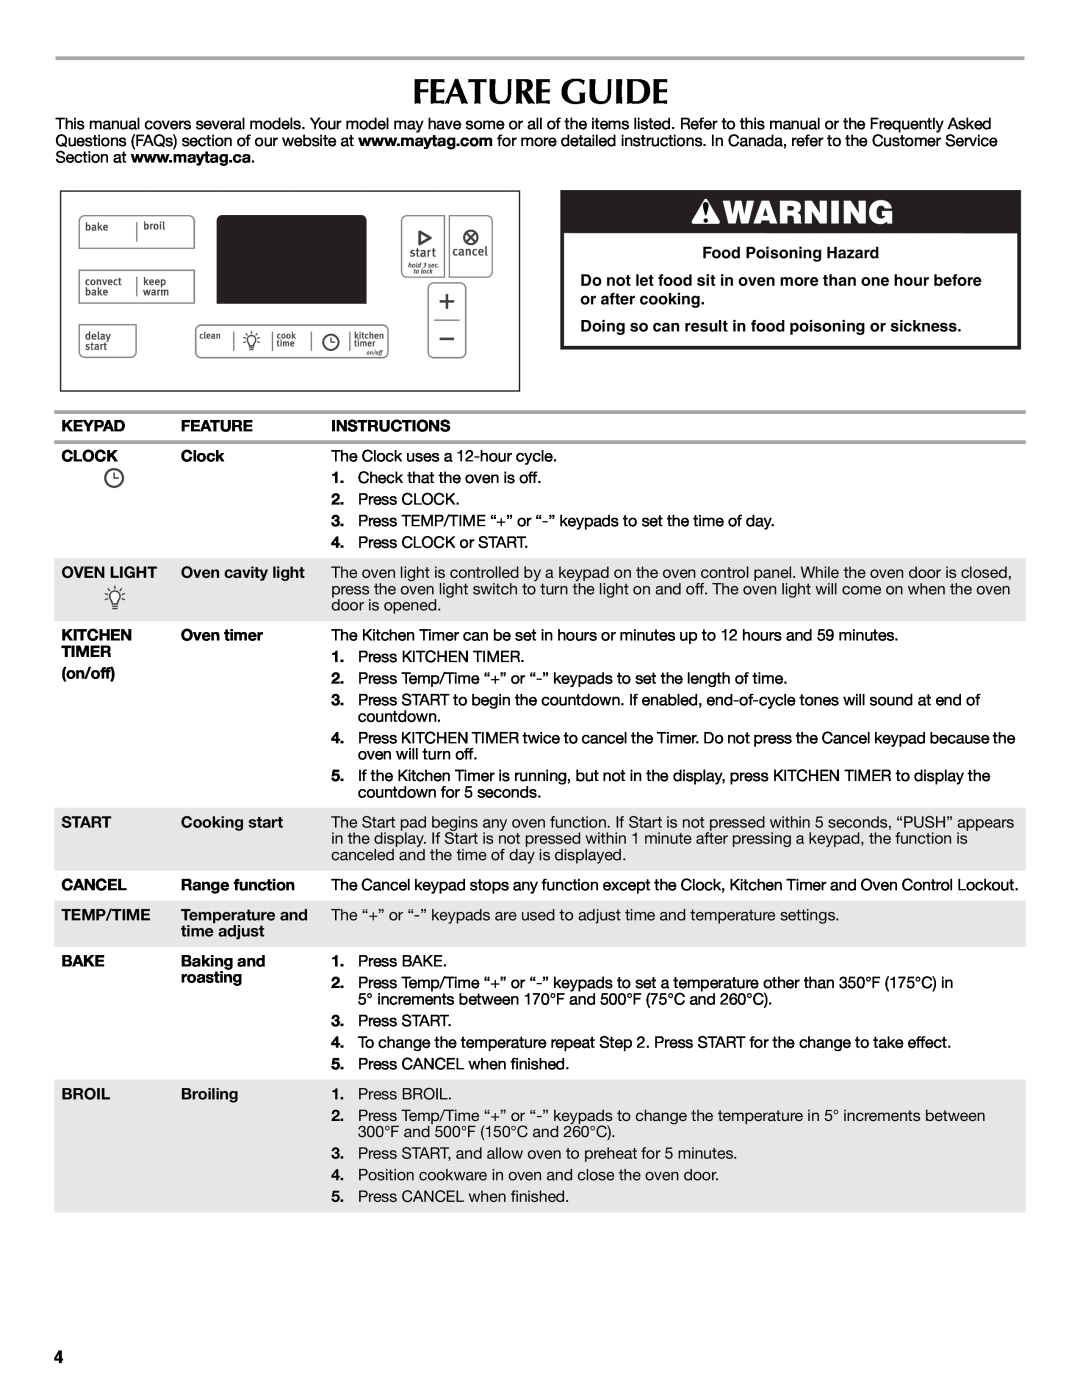 Maytag W10399029B warranty Feature Guide, Food Poisoning Hazard, Doing so can result in food poisoning or sickness 